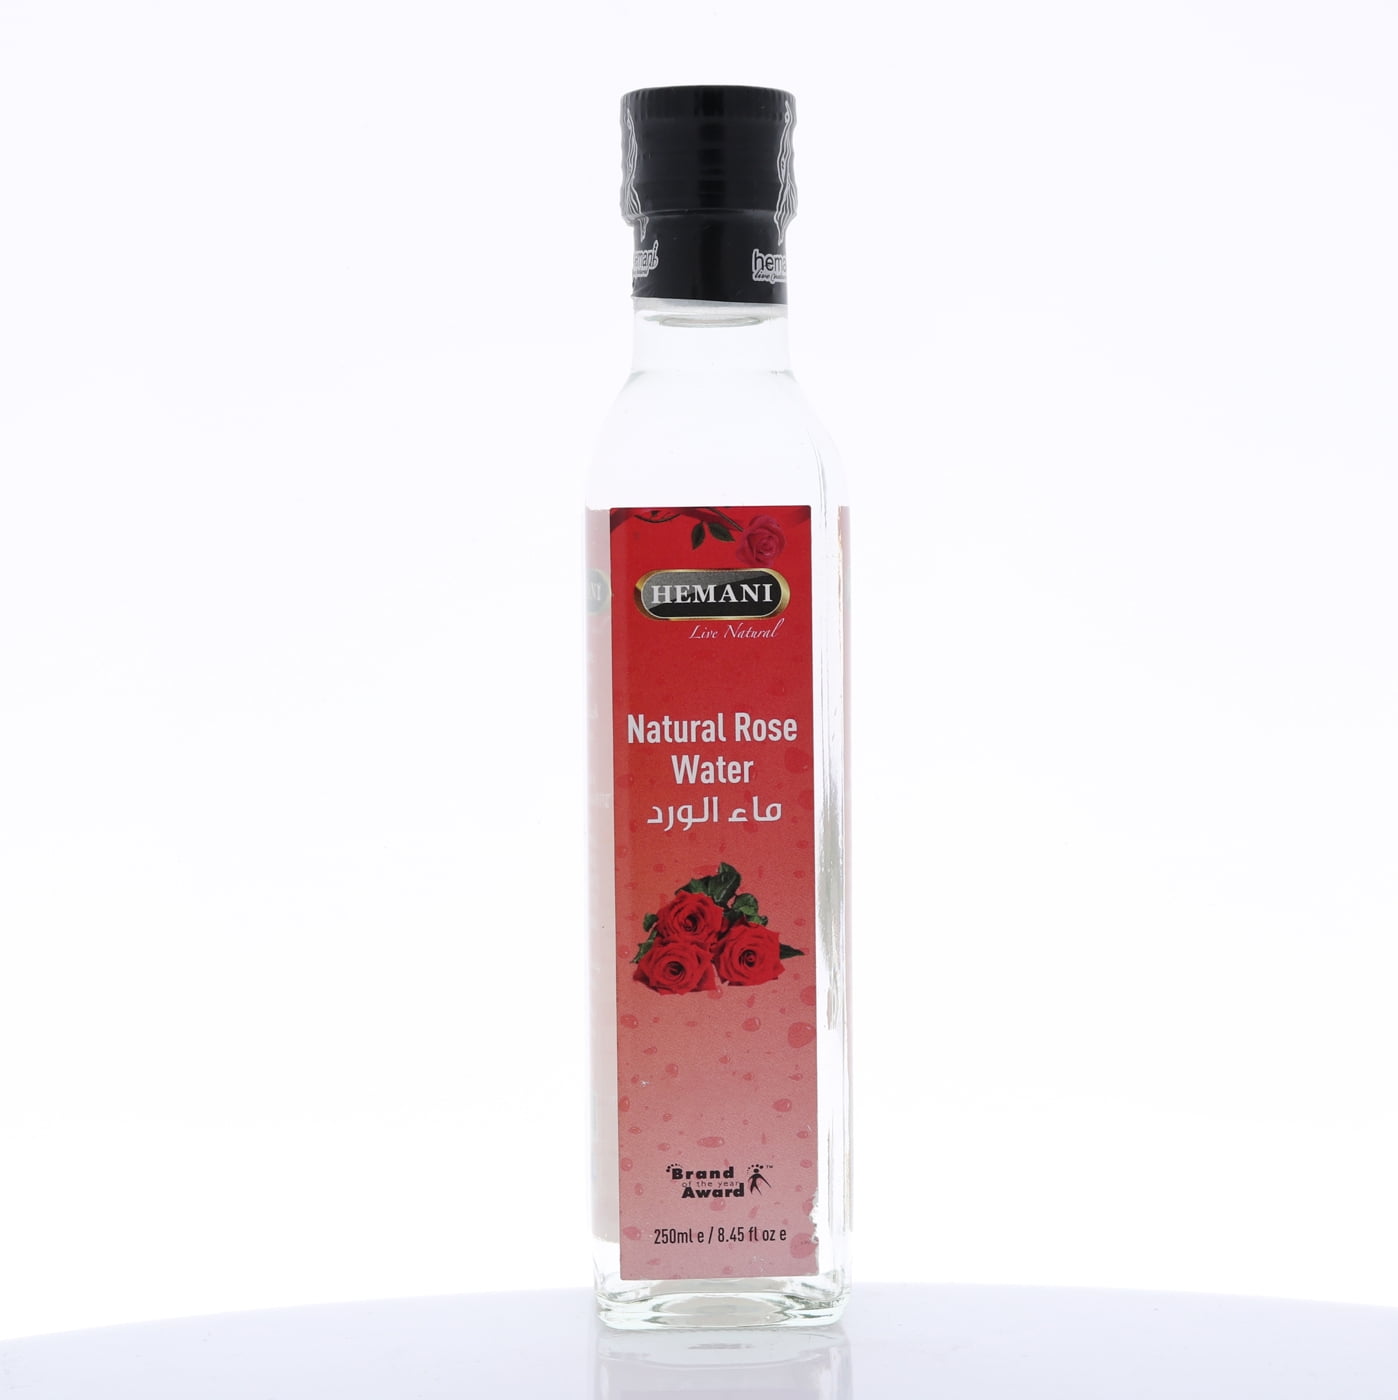 HEMANI Rose Water 250mL (8.5 FL OZ) - Food Essence for Cooking and Baking